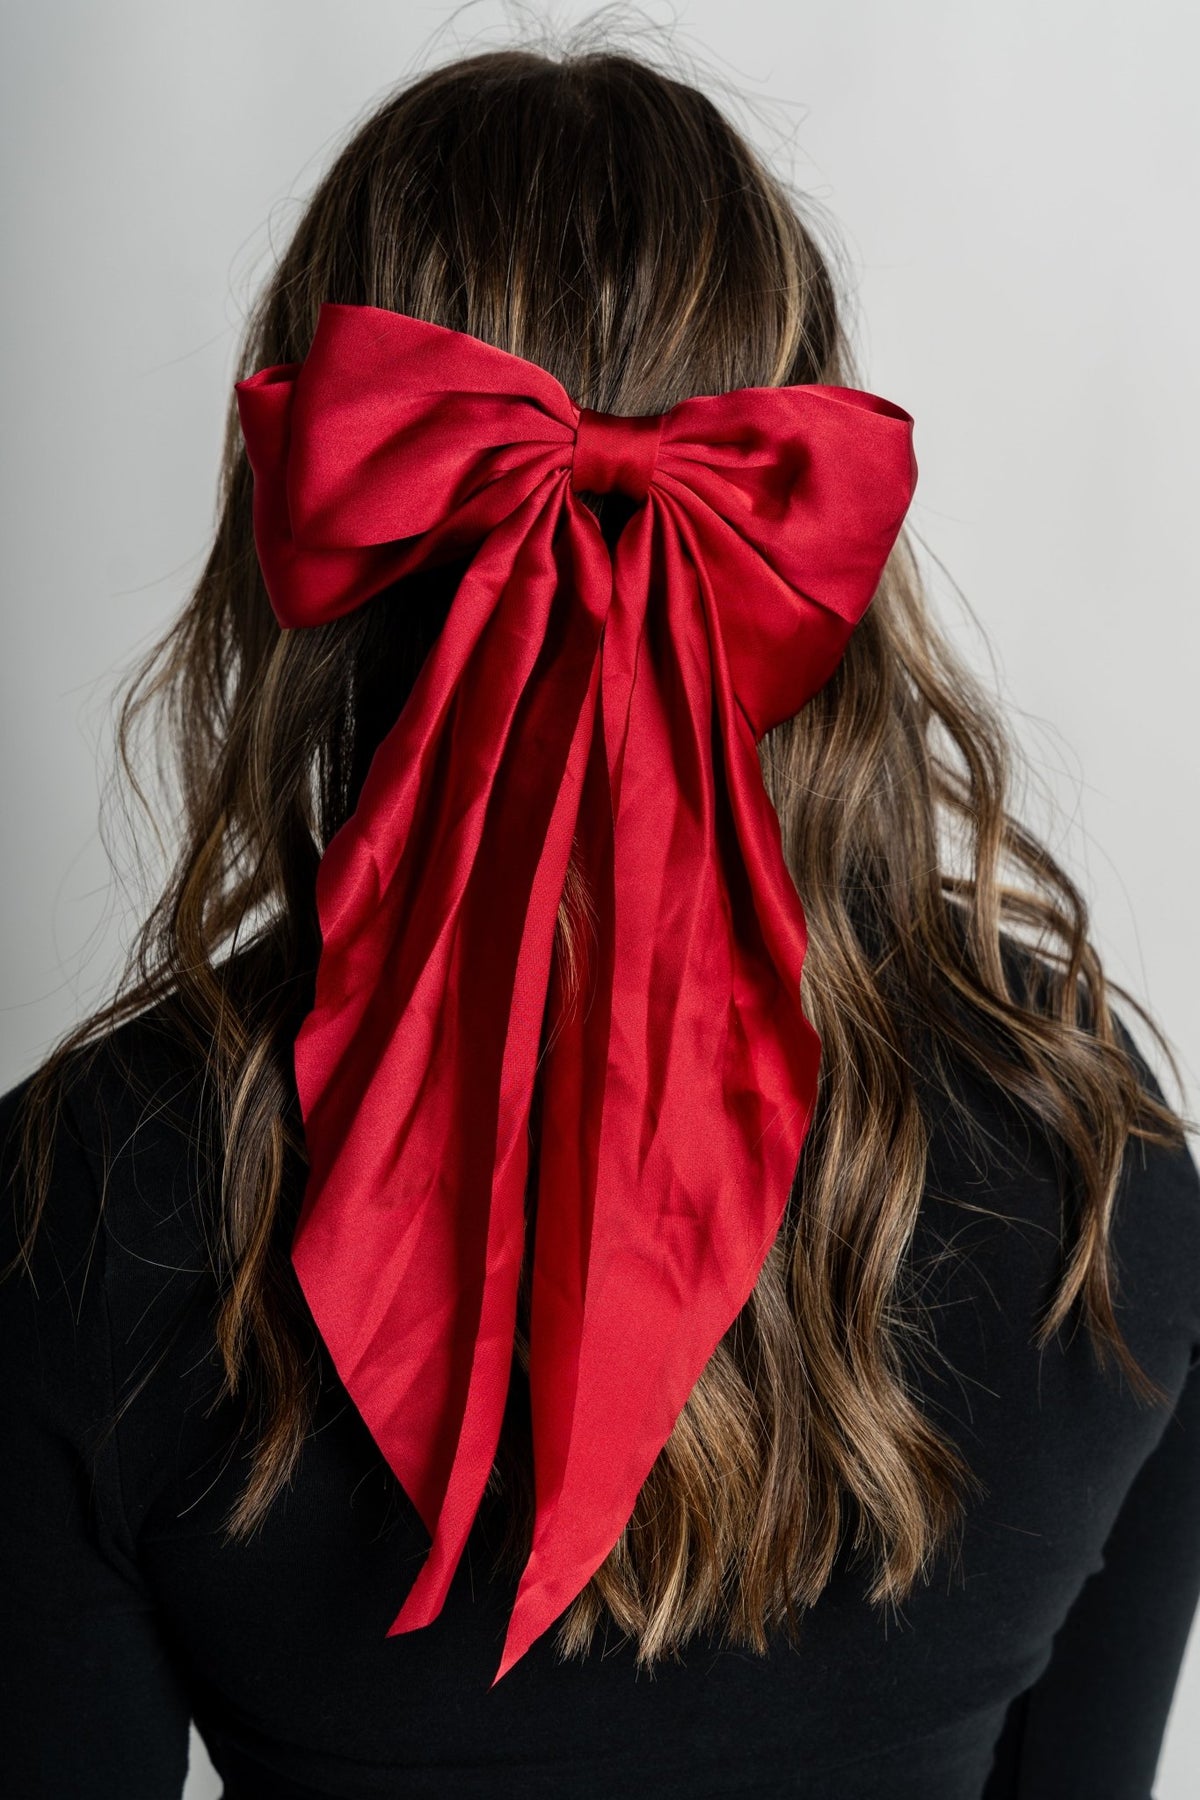 Butterfly satin hair bow clip red - Trendy Gifts at Lush Fashion Lounge Boutique in Oklahoma City